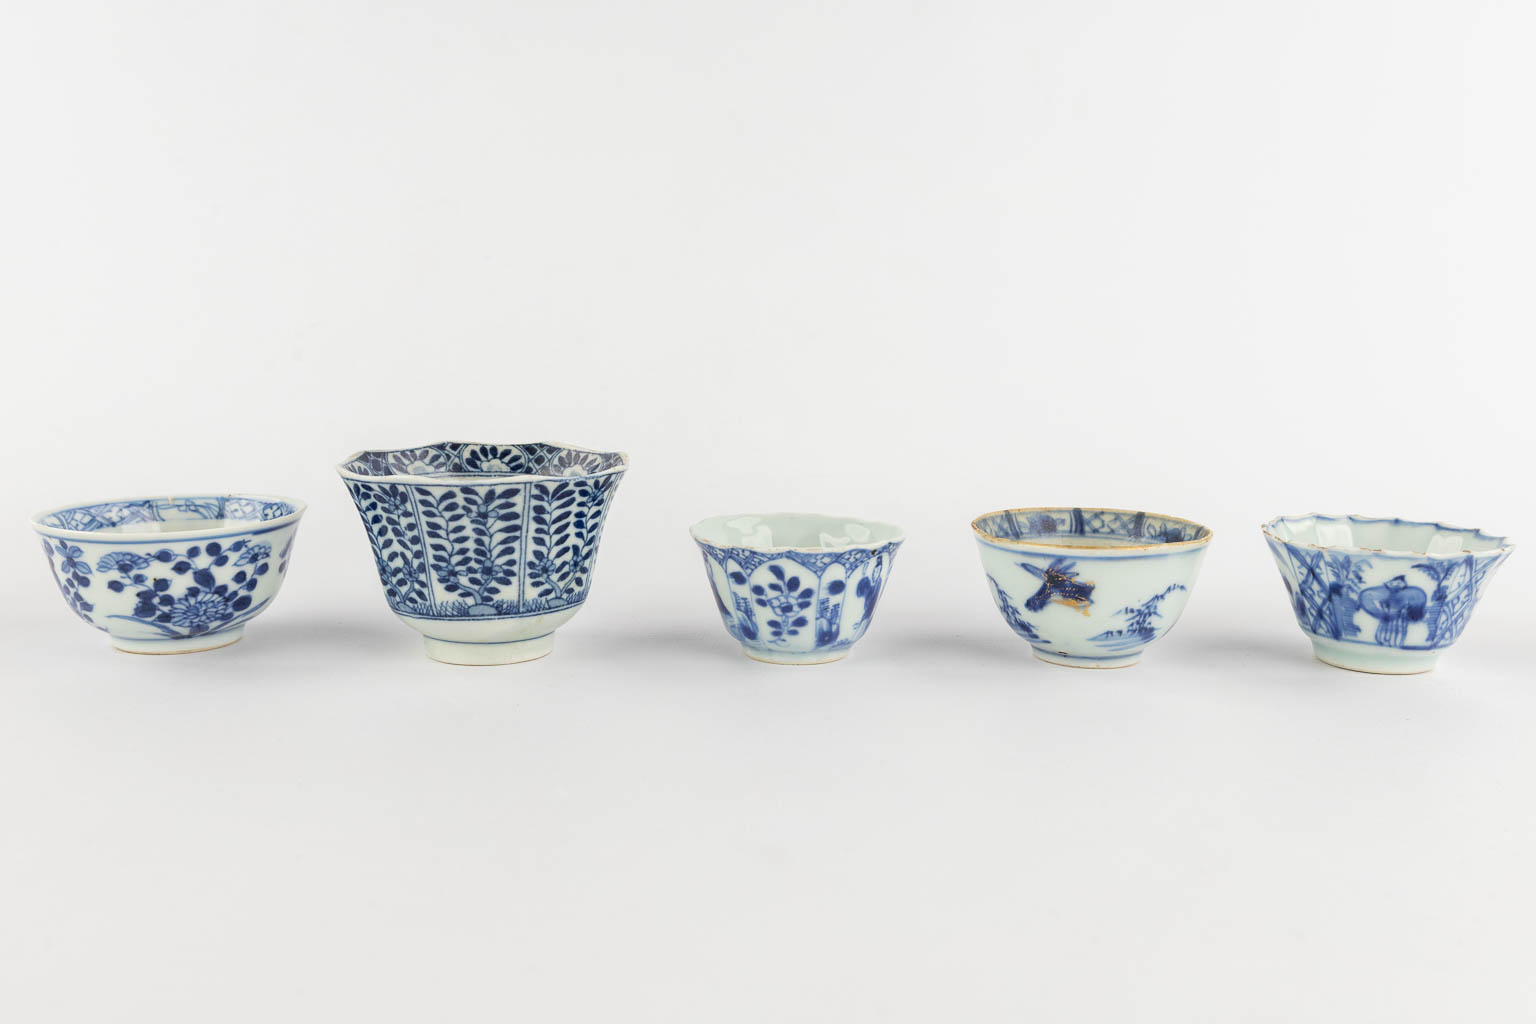 A small collection of porcelain items, Kangxi and Qianlong, blue-white, Chinese Imari. 18th/19th C. (D:12 cm)